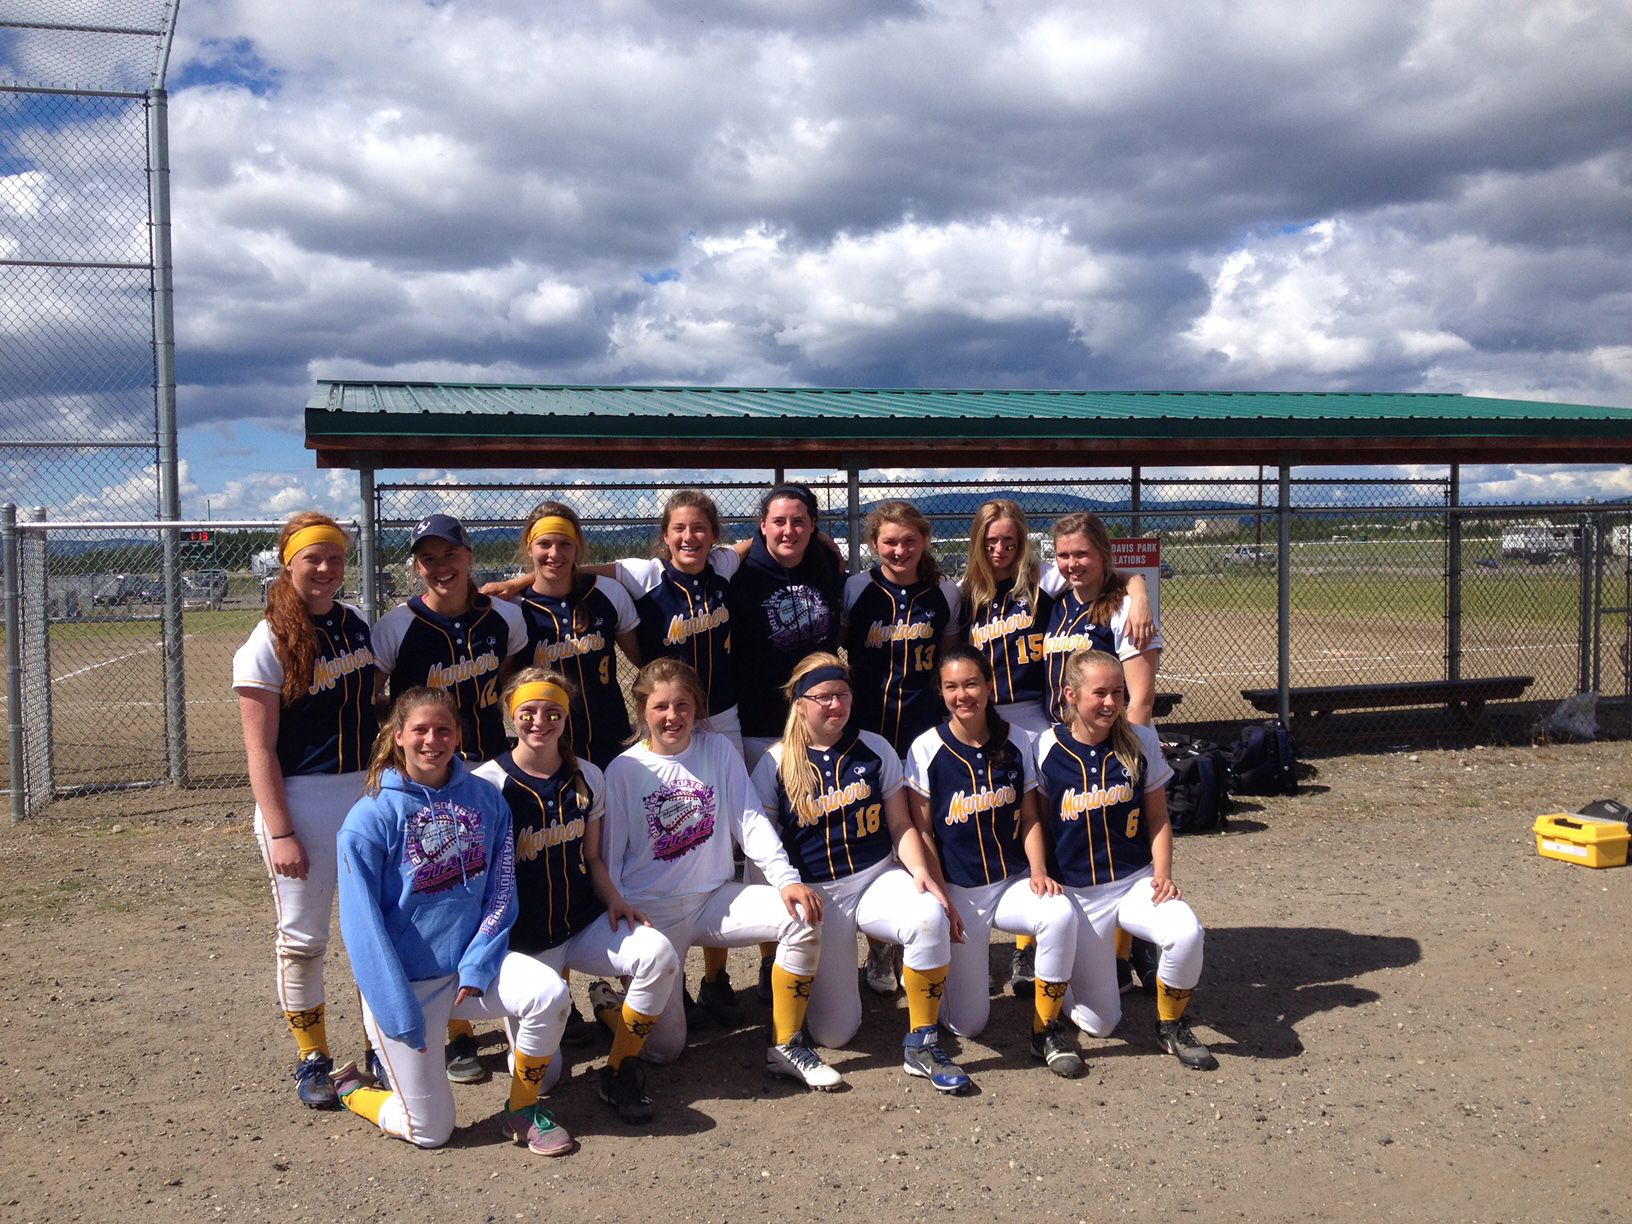 The Mariners softball team finished third during the state championships in Fairbanks last weekend. Back row from left are Kelly Liebers, Kayla Stafford, Mary Hana Bowe, Kyla Pitzman, Isabel Beach, Larsen  Fellows and Malina Fellows; front row from left are Pam Jantzi, Riley Walls, Maggie LaRue, Elsie Smith, Jenna Dragoo and Izabelle Hagge.-Photo provided